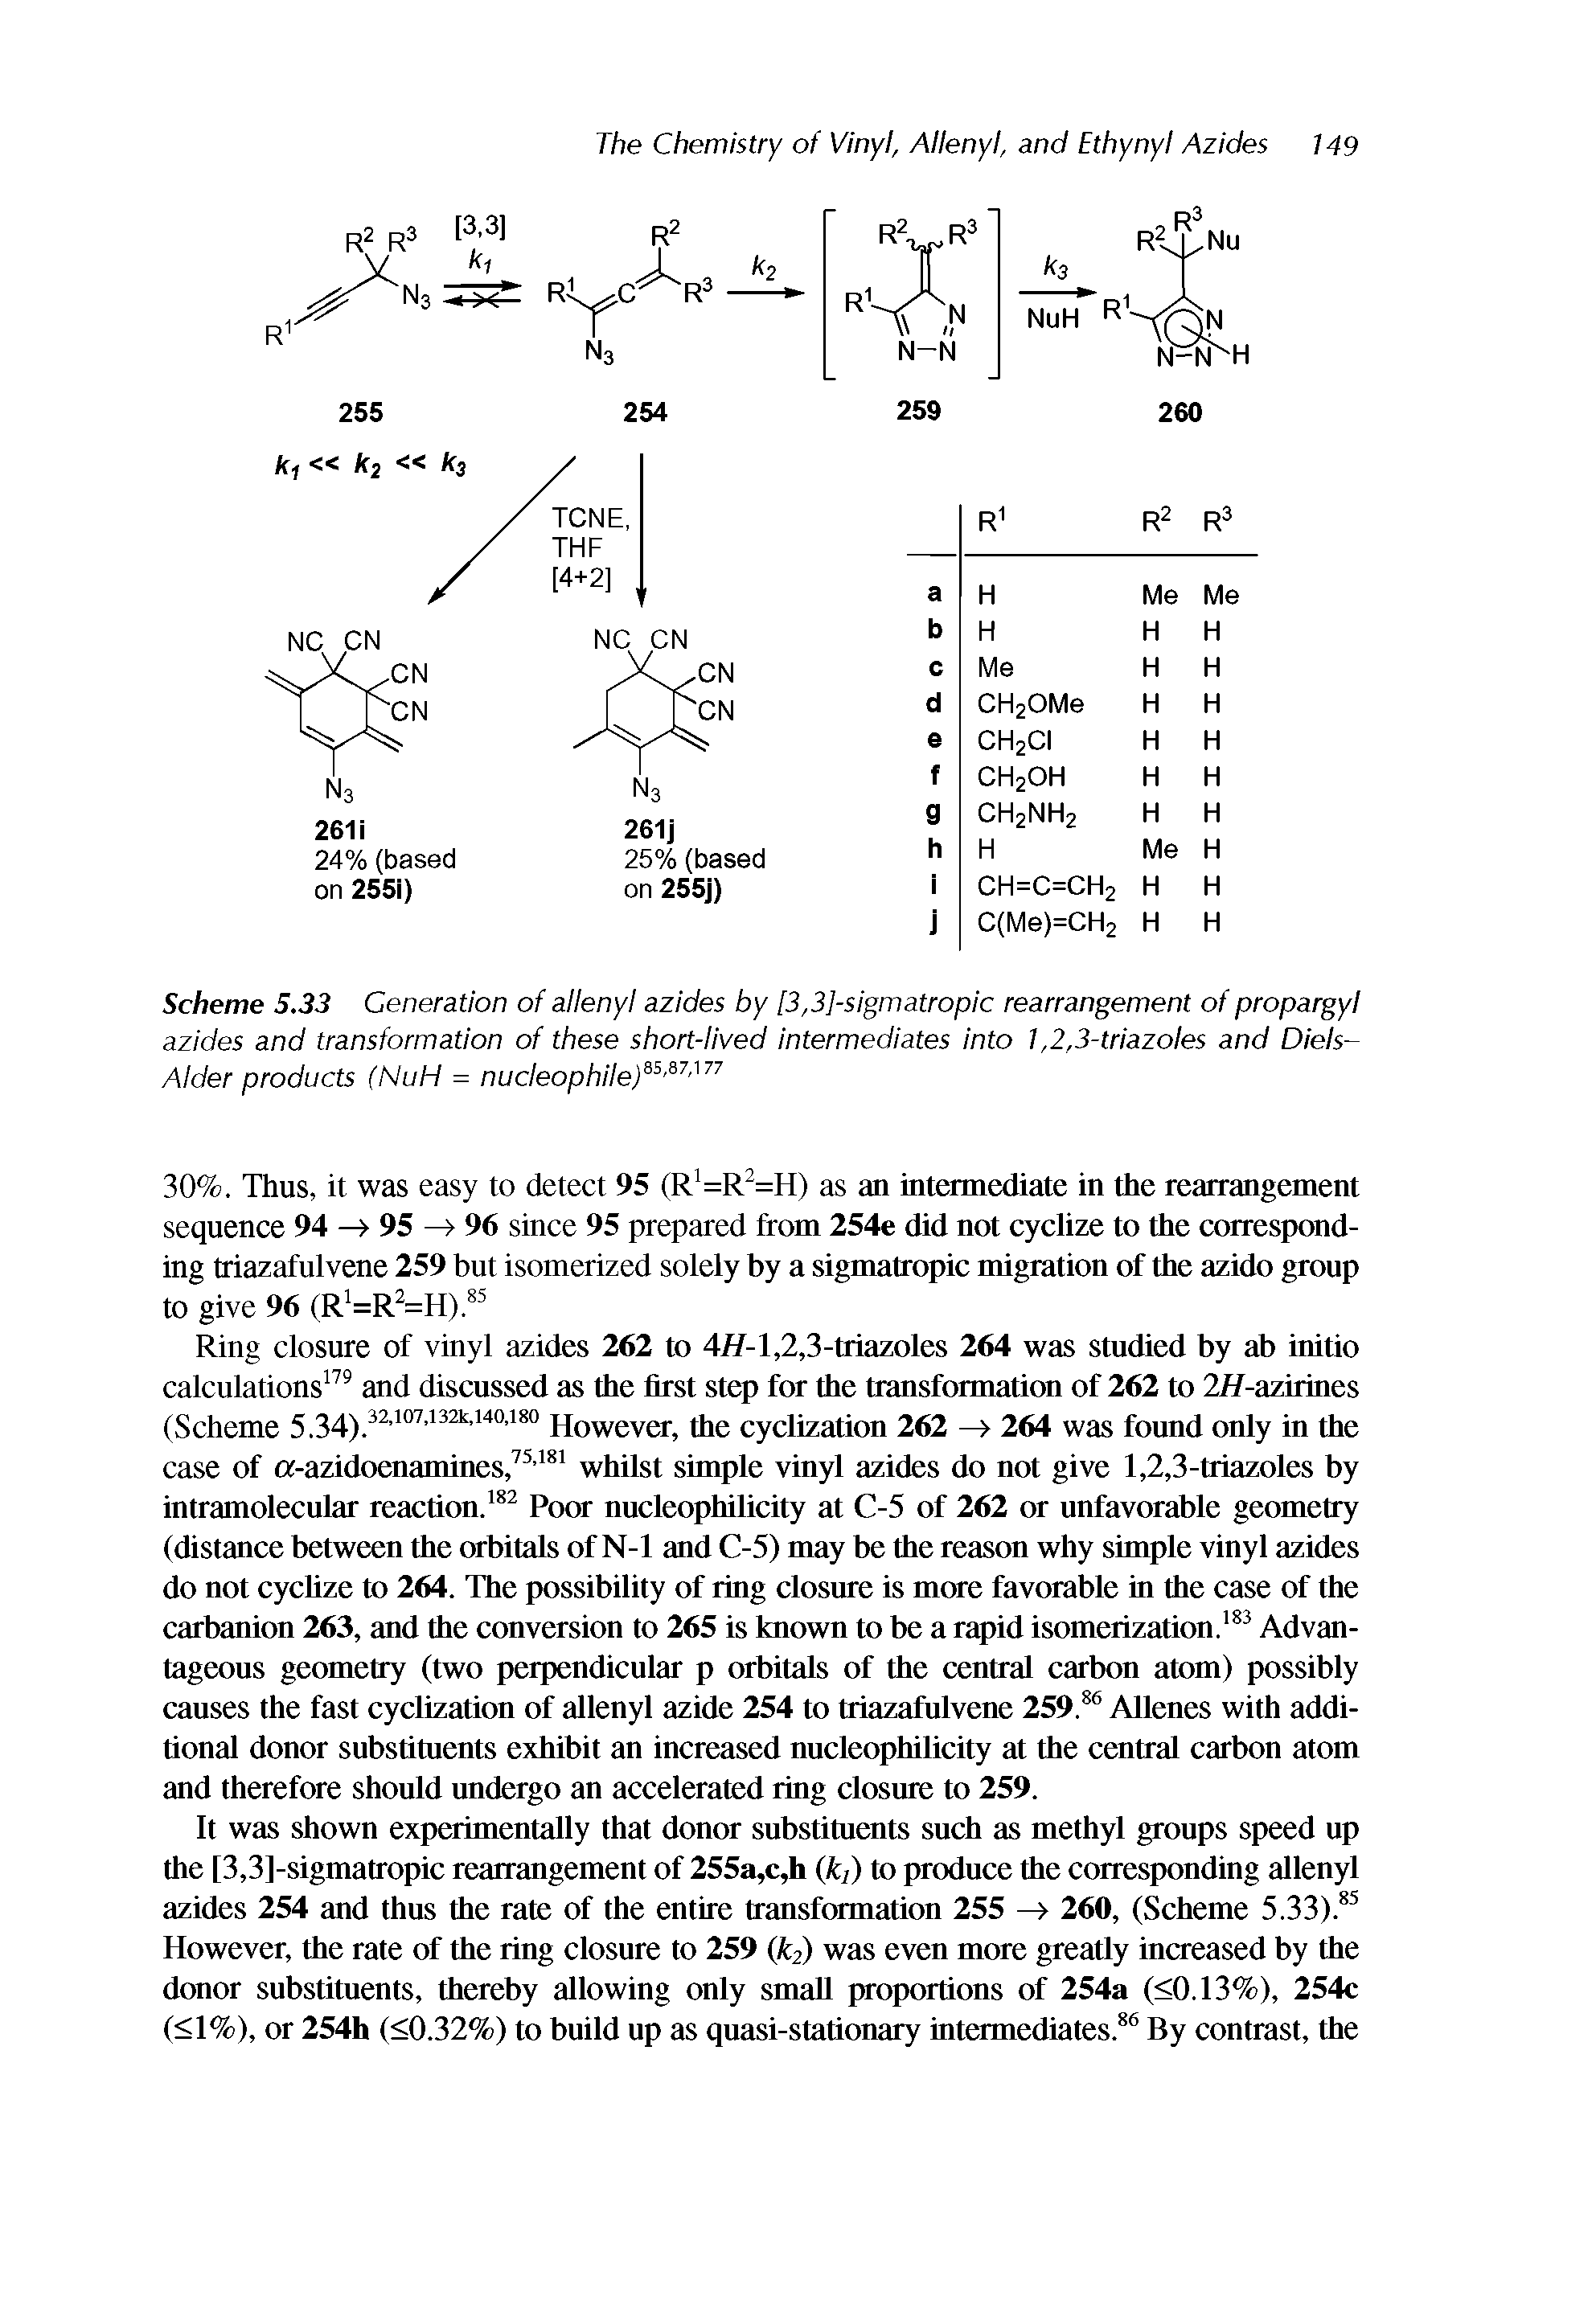 Scheme 5.33 Generation of allenyl azides by [3,31-slgmatroplc rearrangement of propargyl azides and transformation of these short-lived intermediates into 1,2,3-triazoles and Diels-Alder products (NuH = nudeophllef ...